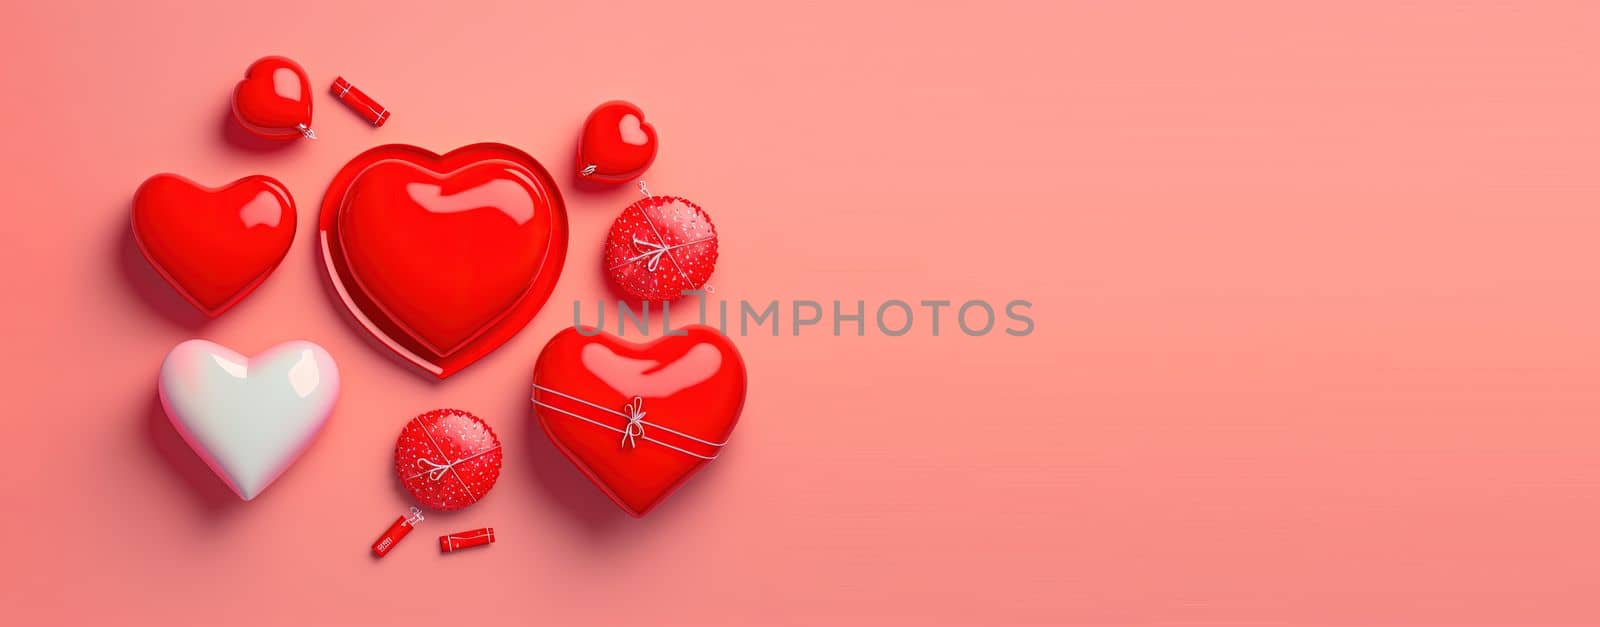 Red 3D heart on a happy Valentine's Day banner background